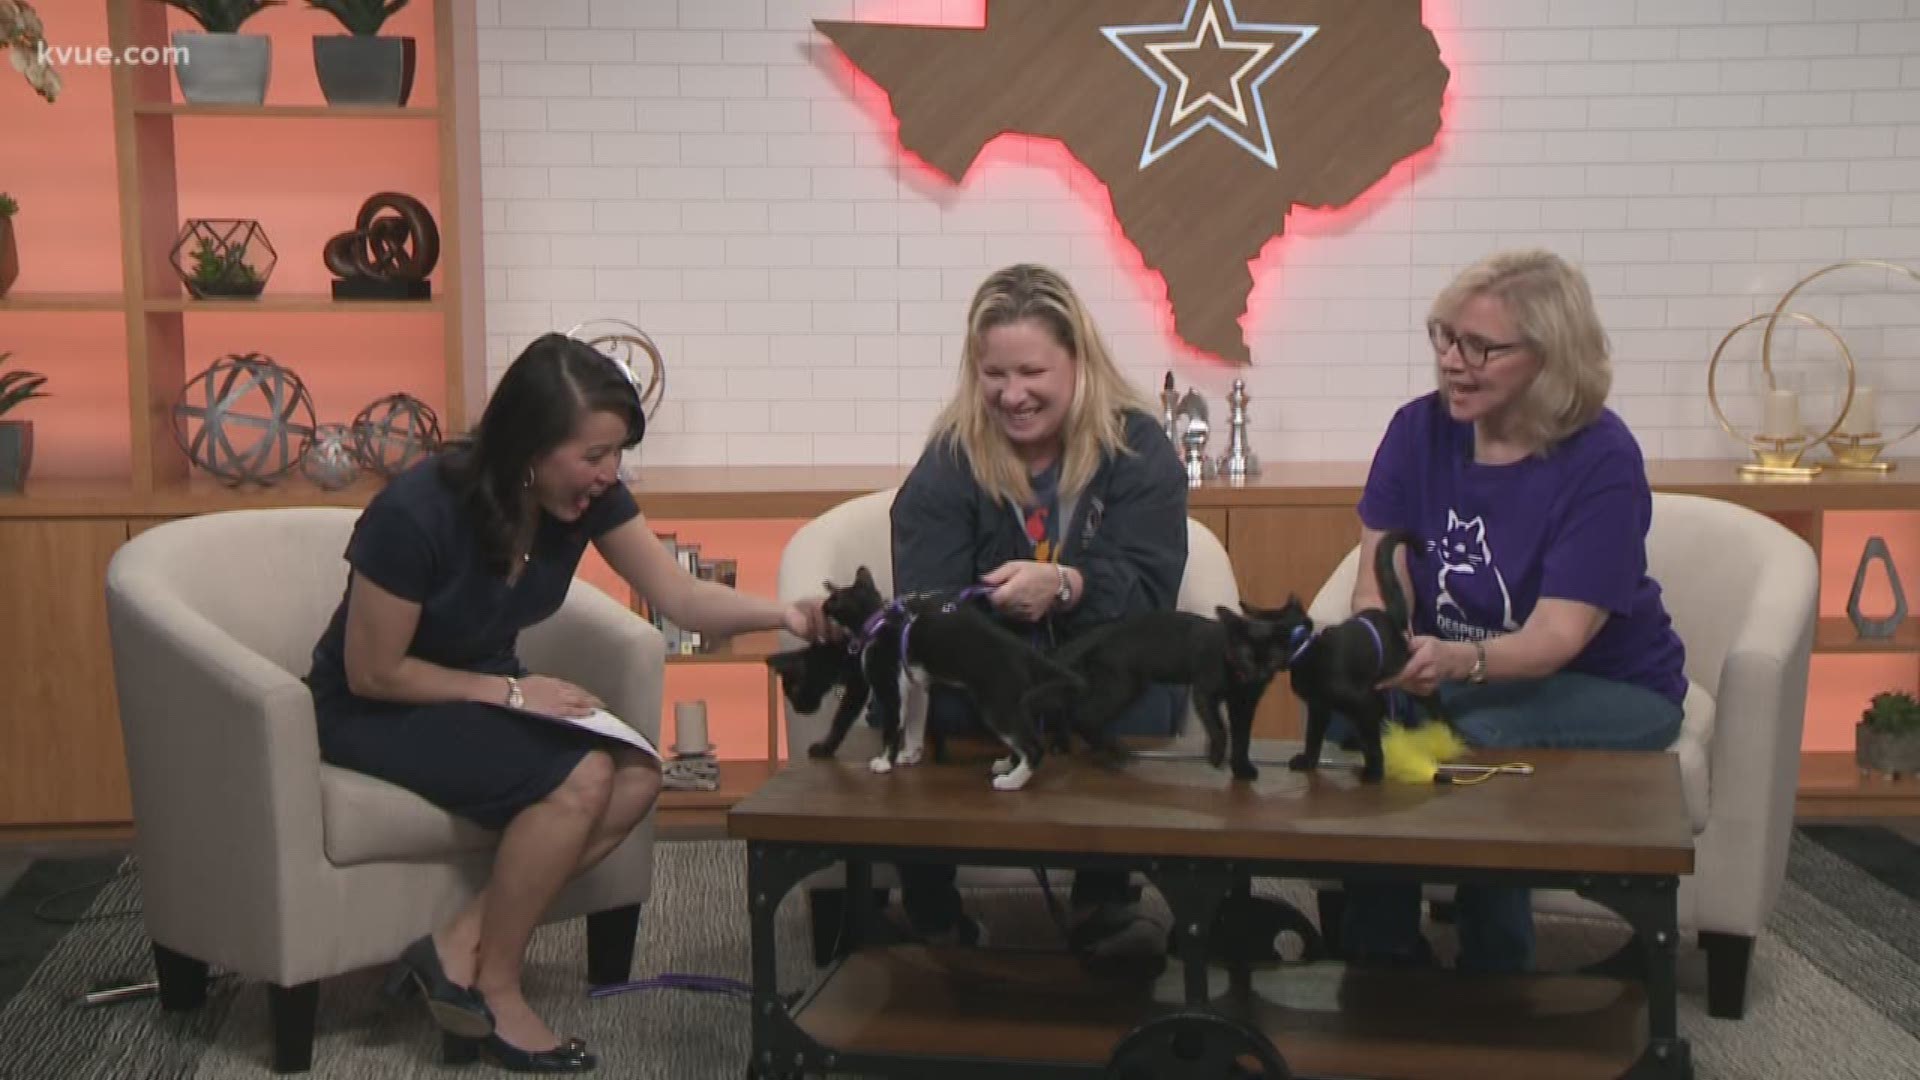 Joining us this morning is Lauralei Combs with Austin Animal Center and she's brought along Sebastian, Puddin, Pretty and Delilah today.